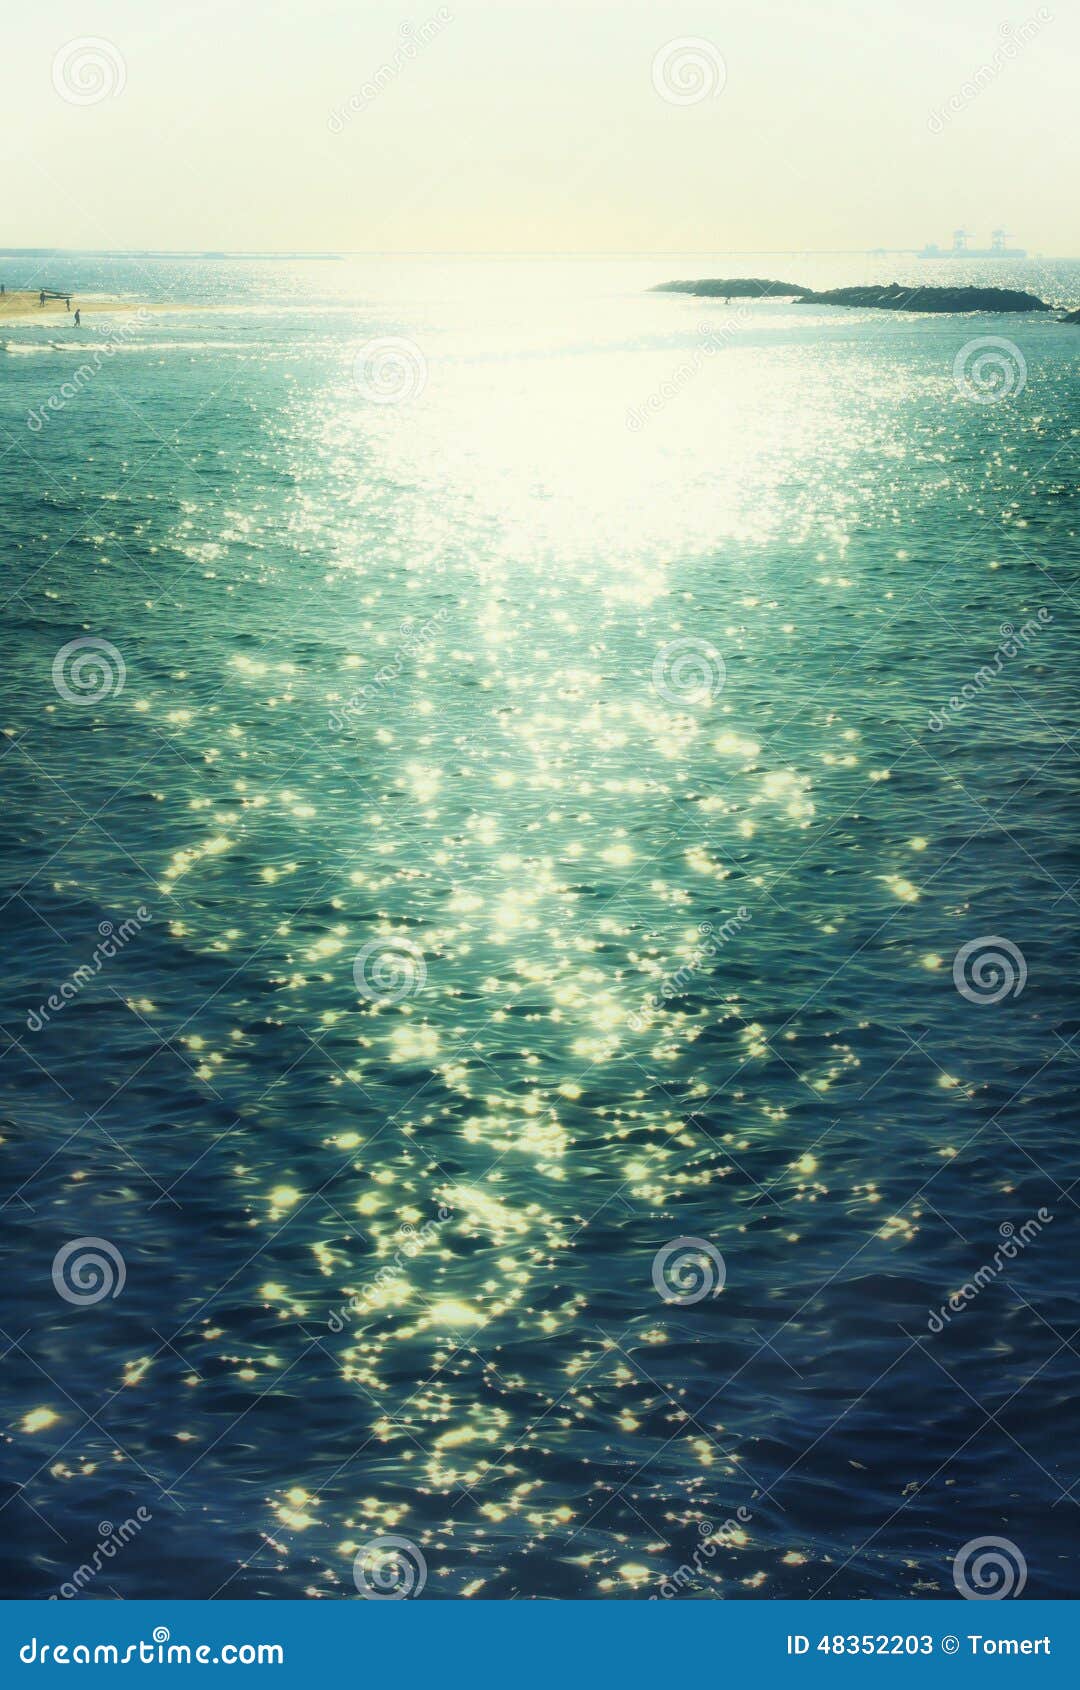 background of sunset and sea waves. filtered image